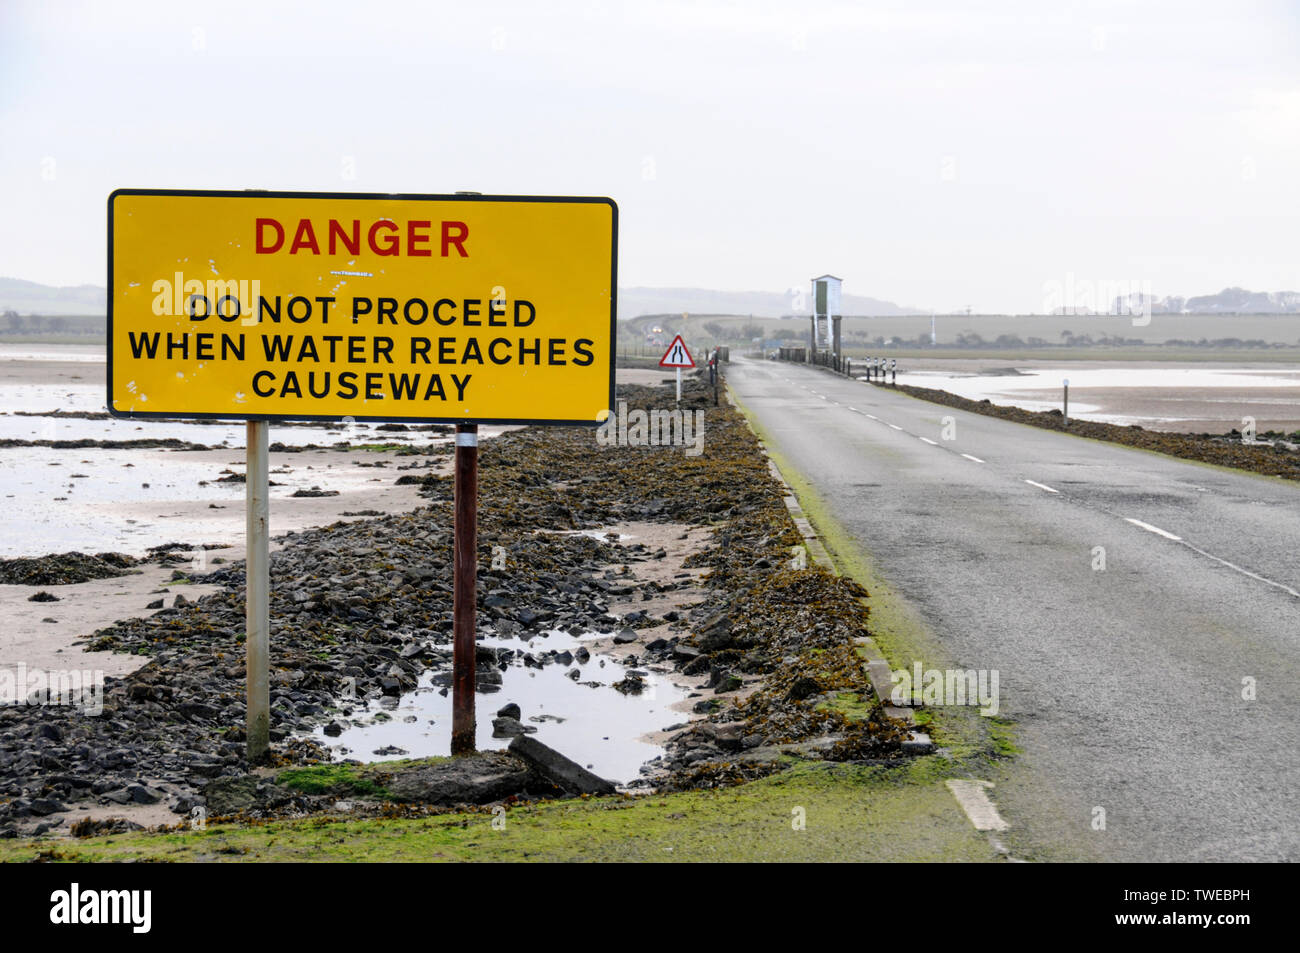 The Danger warning sign for tourist traffic crossing the 3-mile stretch of tarmac road at low tide connecting Lindisfarne Holy Island from the mainland Stock Photo